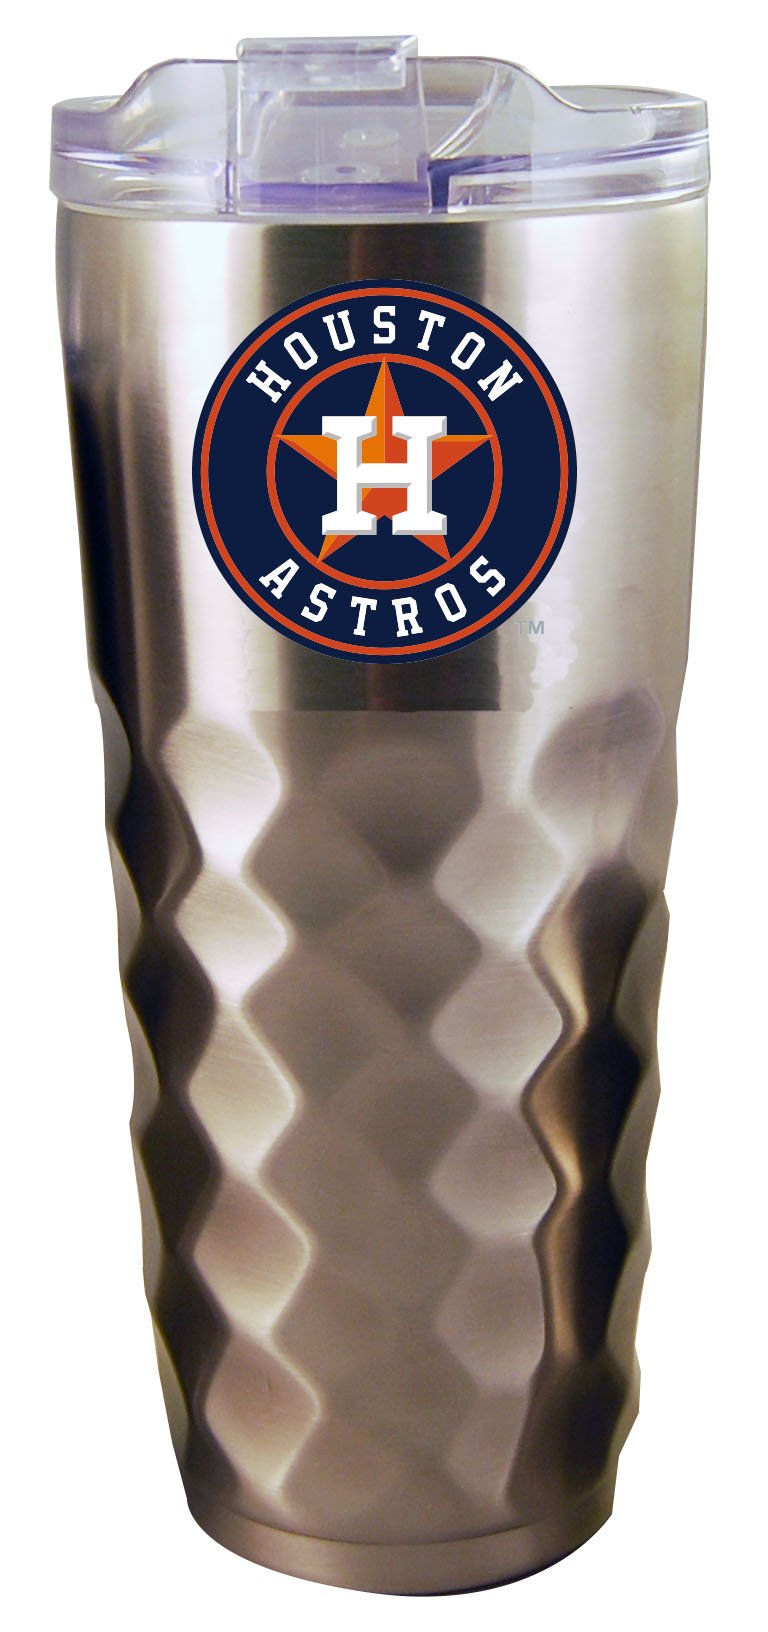 32OZ SS DIAMD TMBLR ASTROS
CurrentProduct, Drinkware_category_All, HAS, Houston Astros, MLB
The Memory Company